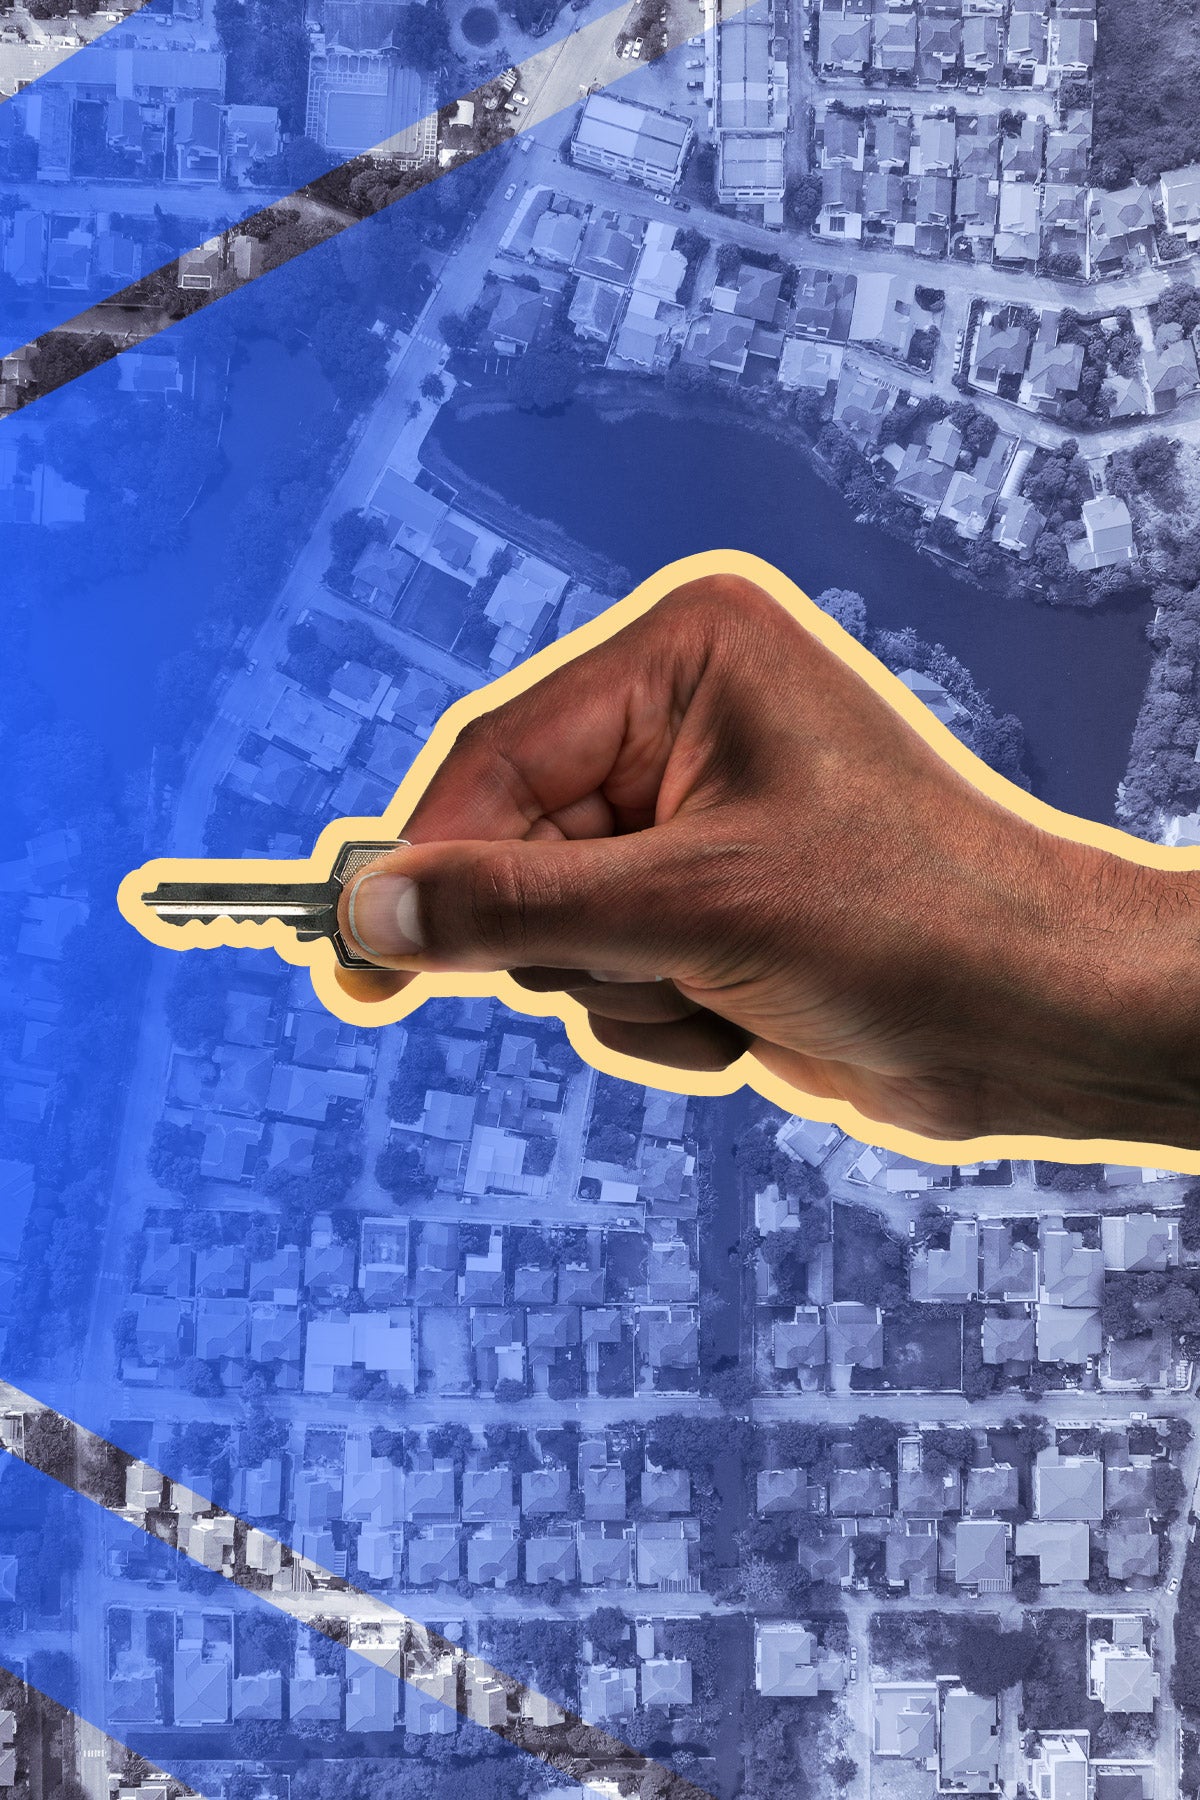 Photo illustration: A Black hand holds a key in a “unlock” position. The hand is on top of birdseye photo of a suburban houses, and there is a blue glow coming from the left side of the photo.